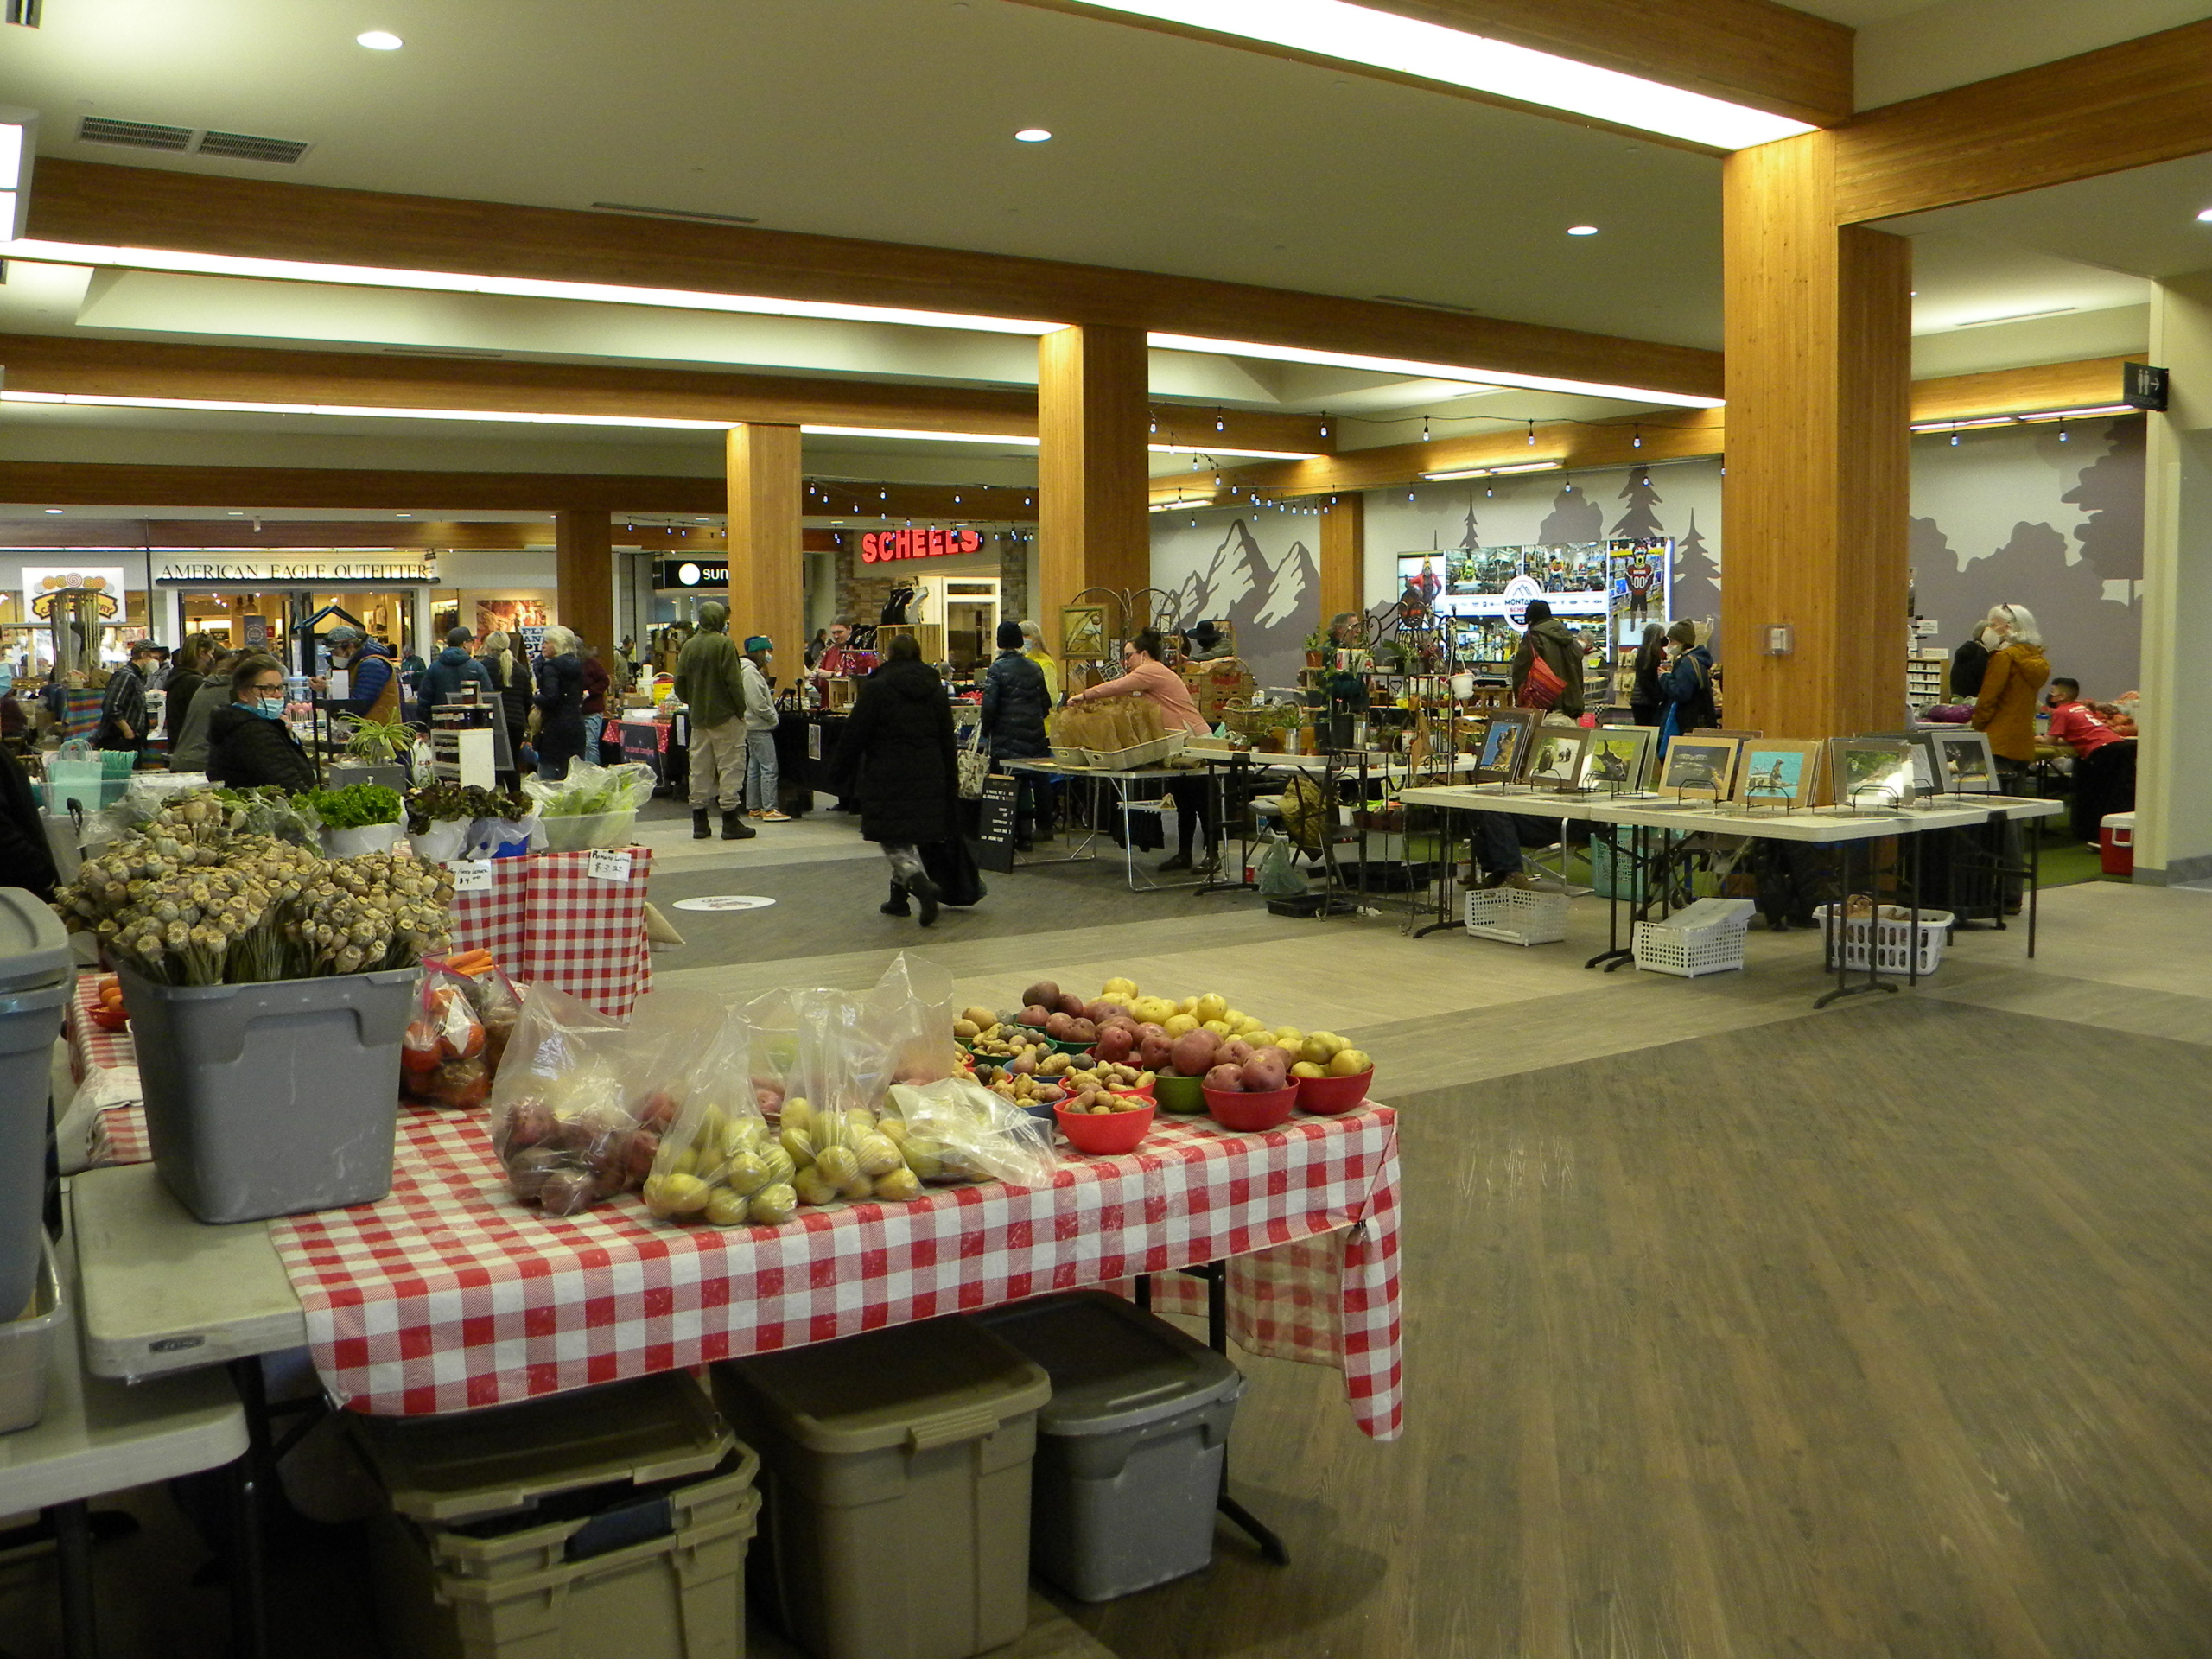 Farmers market tables set up inside South Gate Mall in Missoula, MT. 